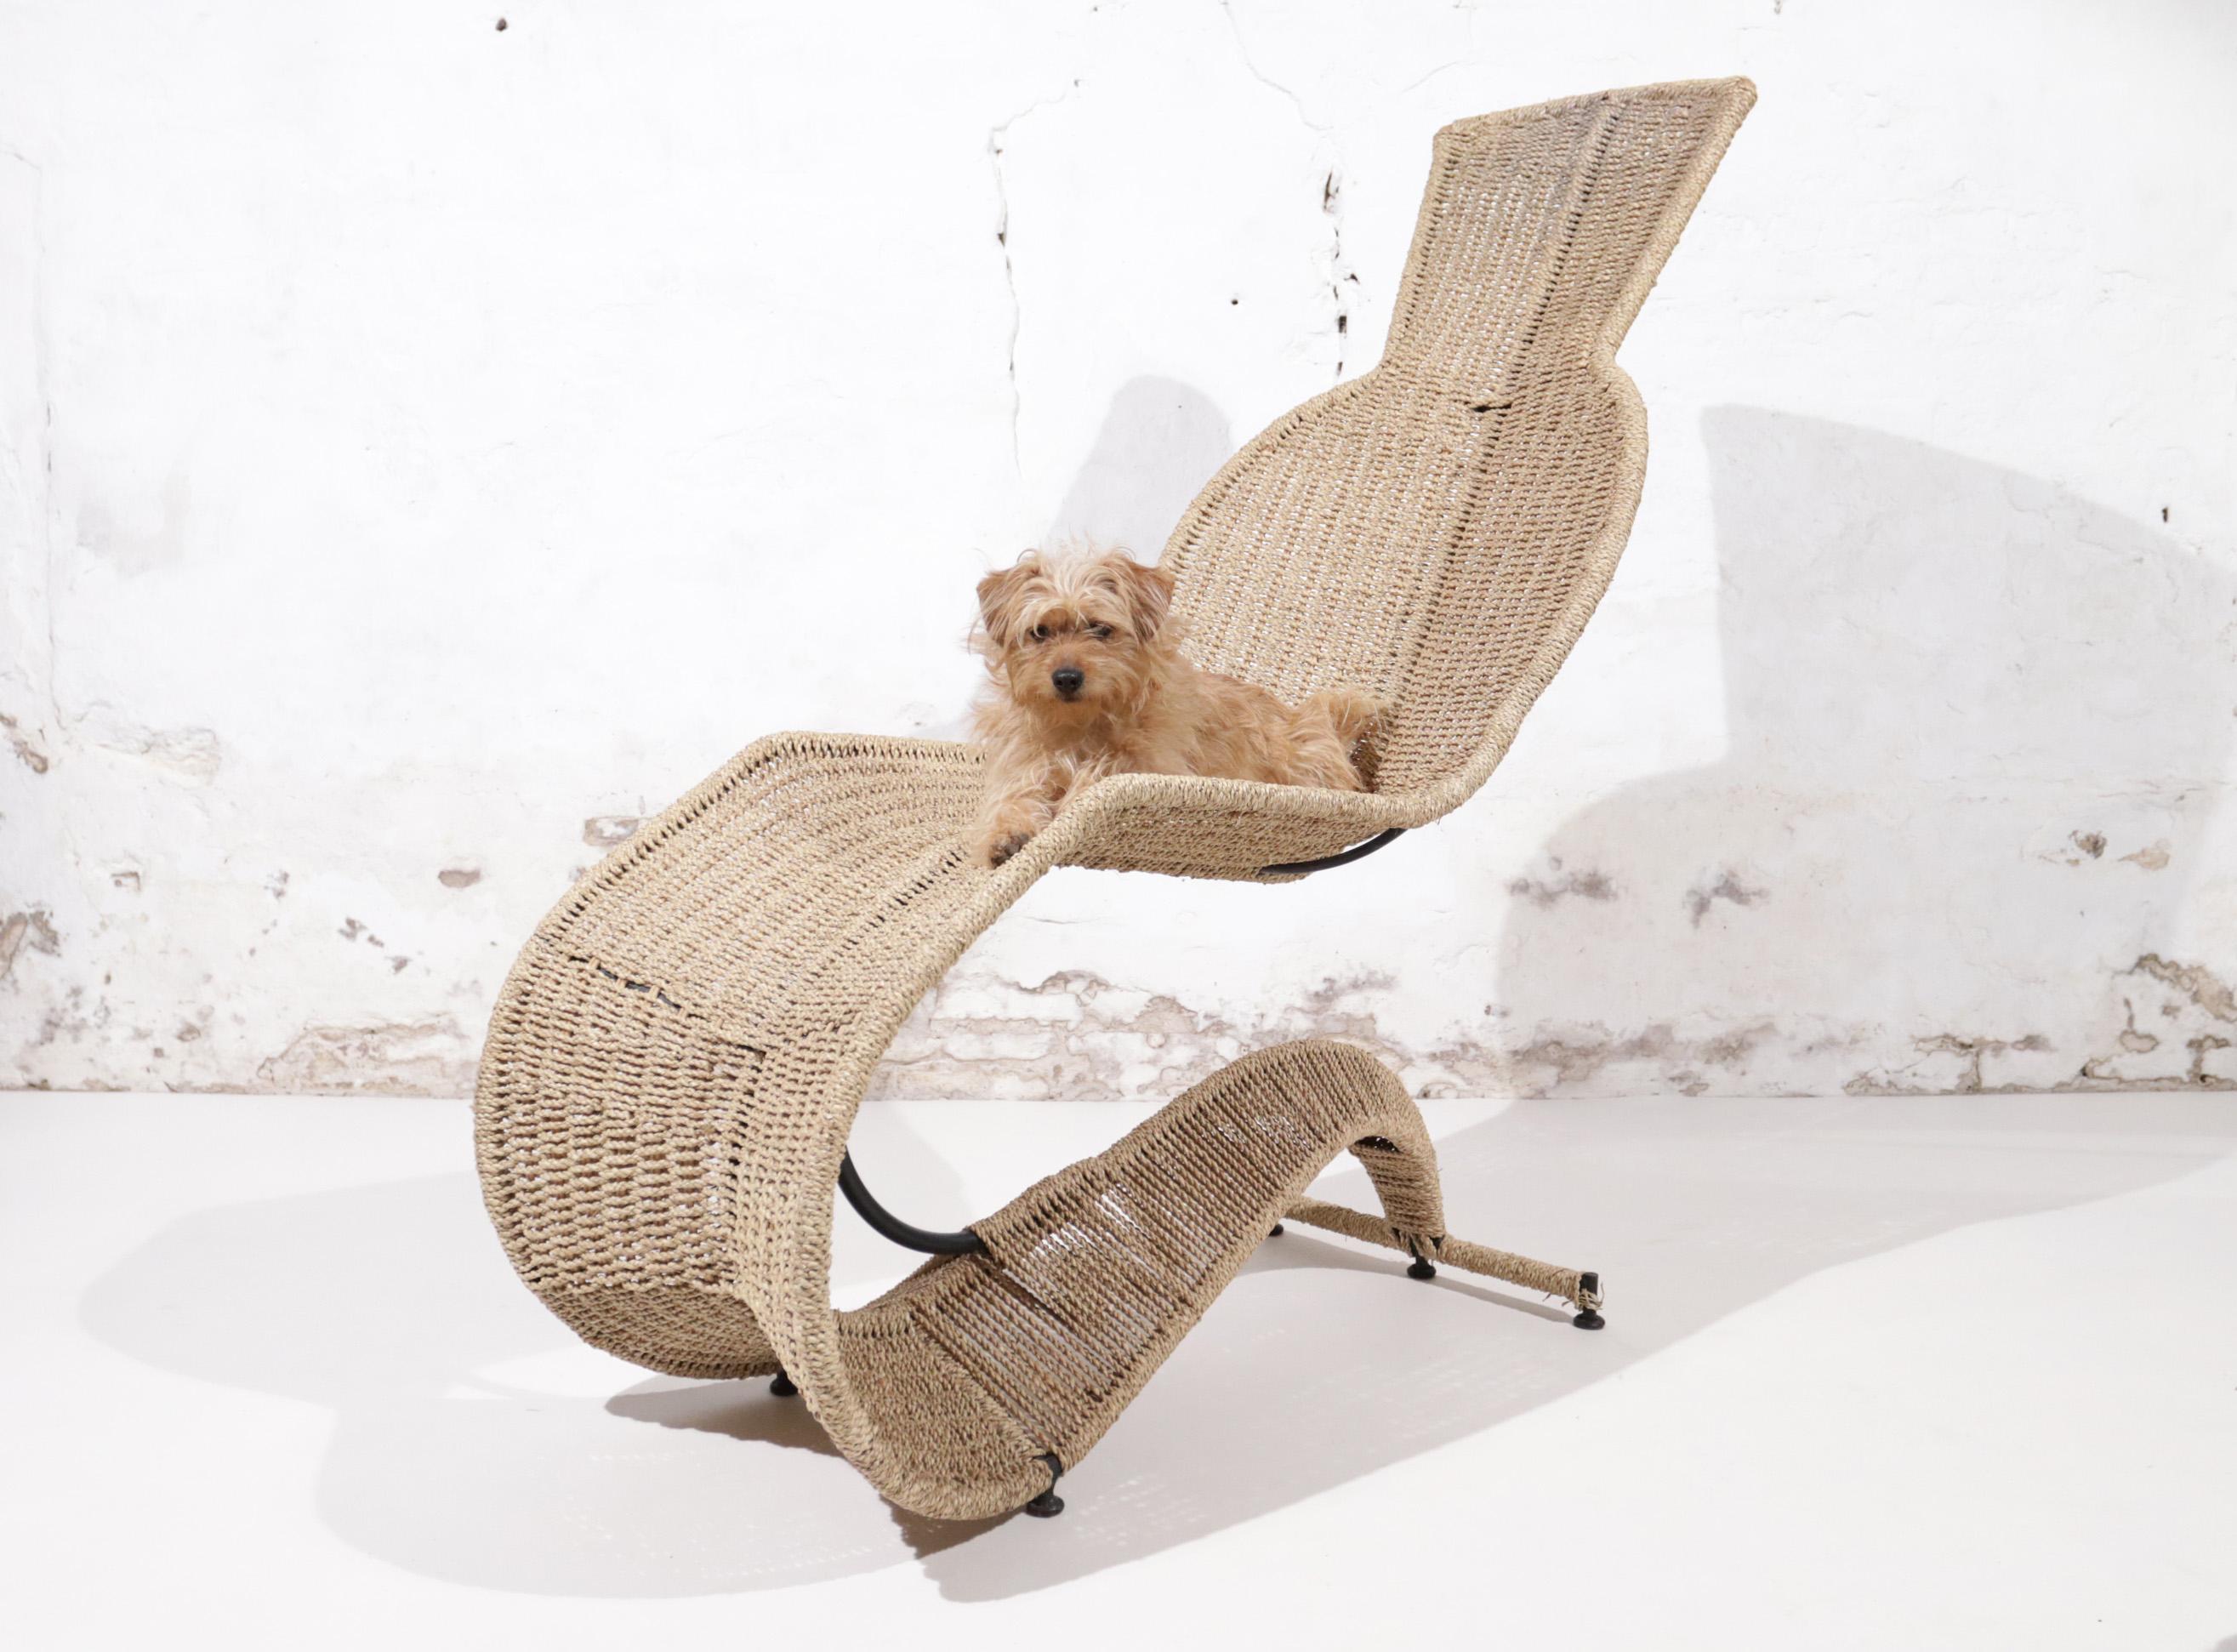 Tom Dixon Bolide Iron Woven Seagrass Rocking Chaise London 1991 For Sale 11